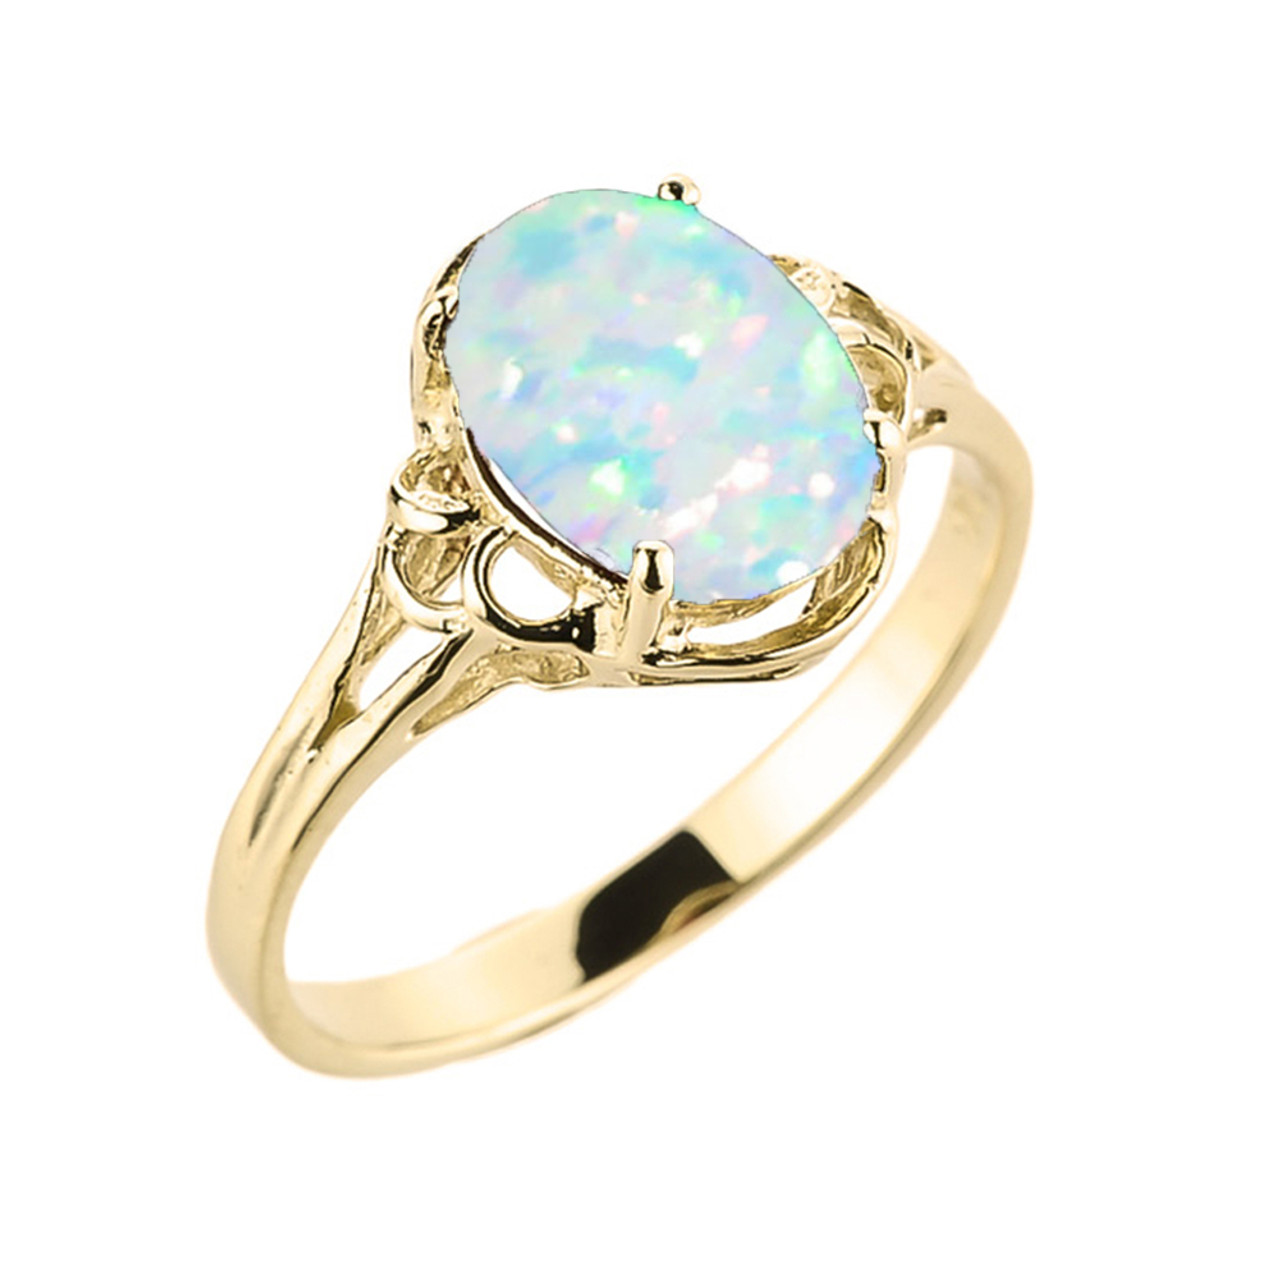 Details about   925 Sterling Silver Opal Gemstone Ring 3.69 gm Ring Fine Jewelry CCI 